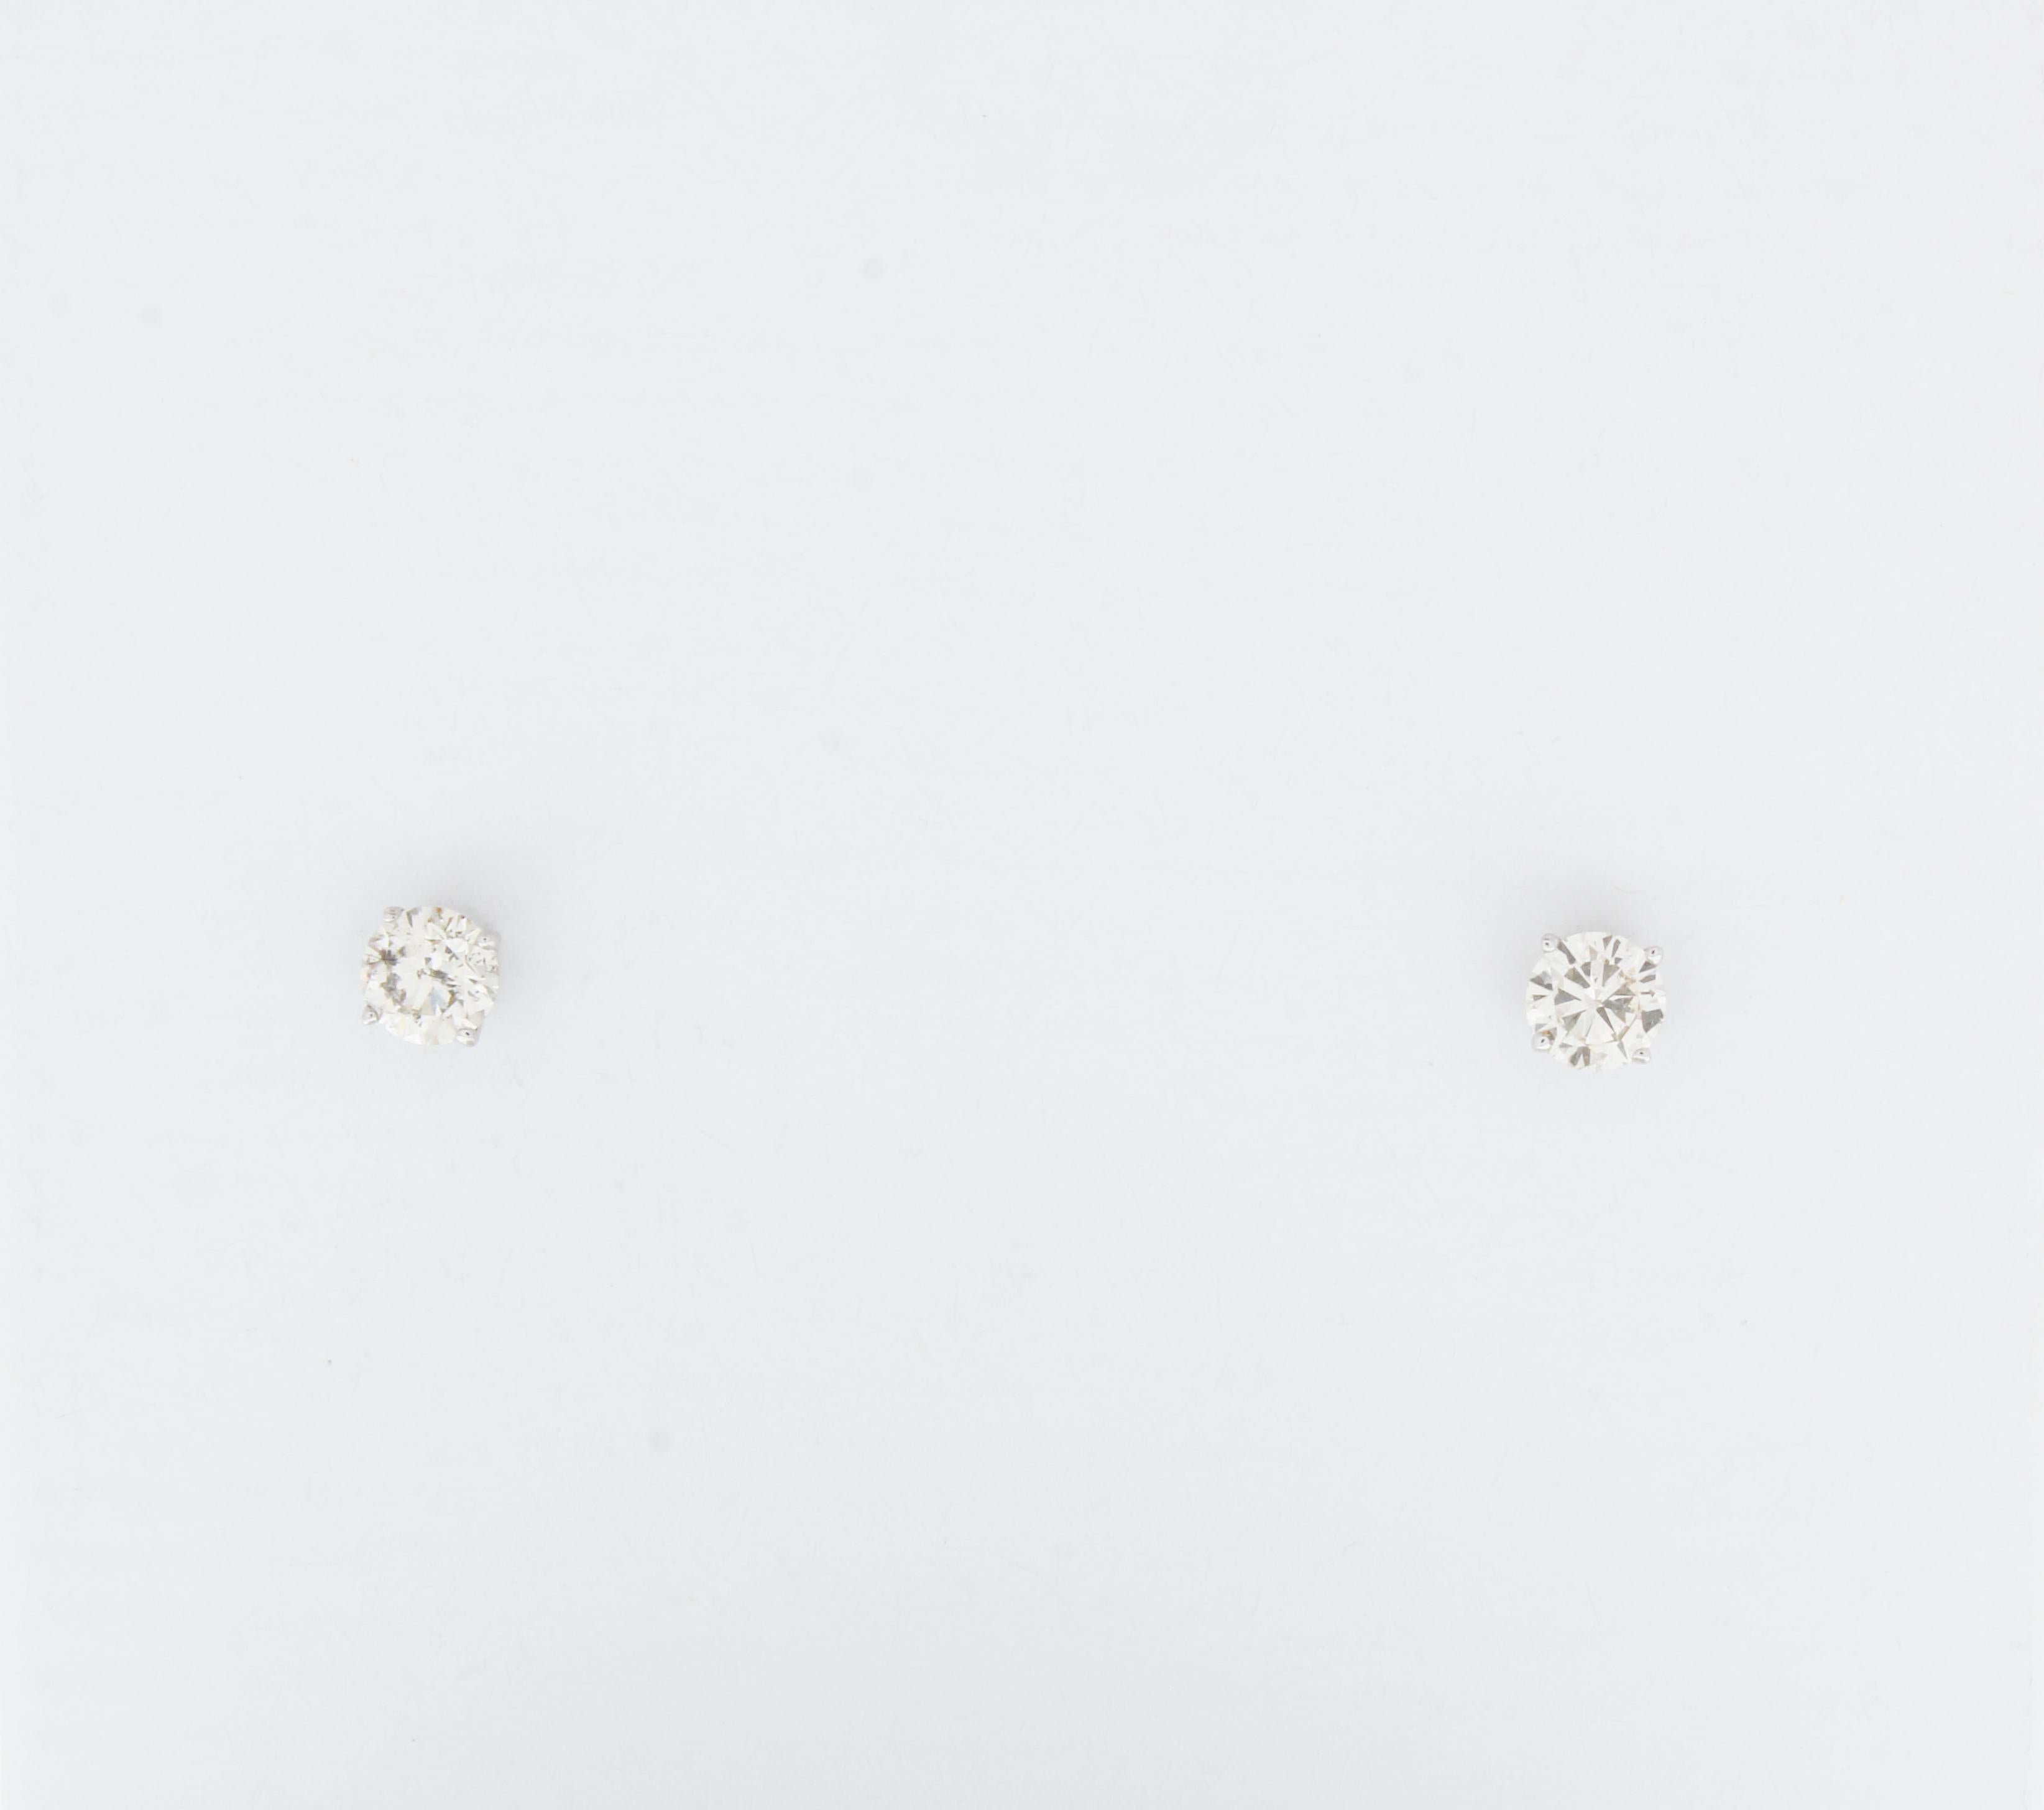 Contemporary .33 Carat Total Diamond Three Prong Stud Earrings in 14k Rose Gold		 For Sale